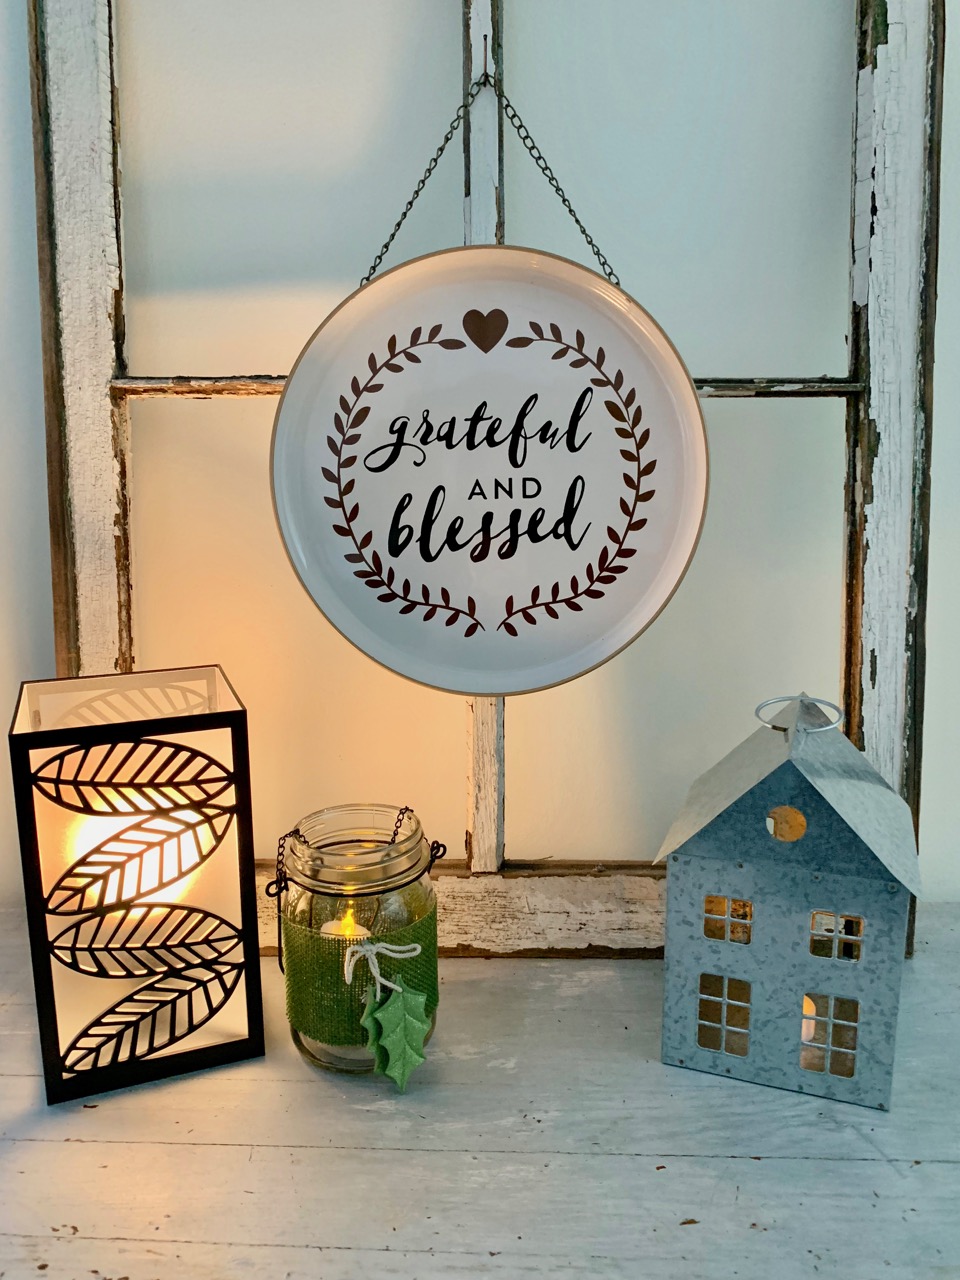 Dollar General Home Decor! So cute AND affordable!